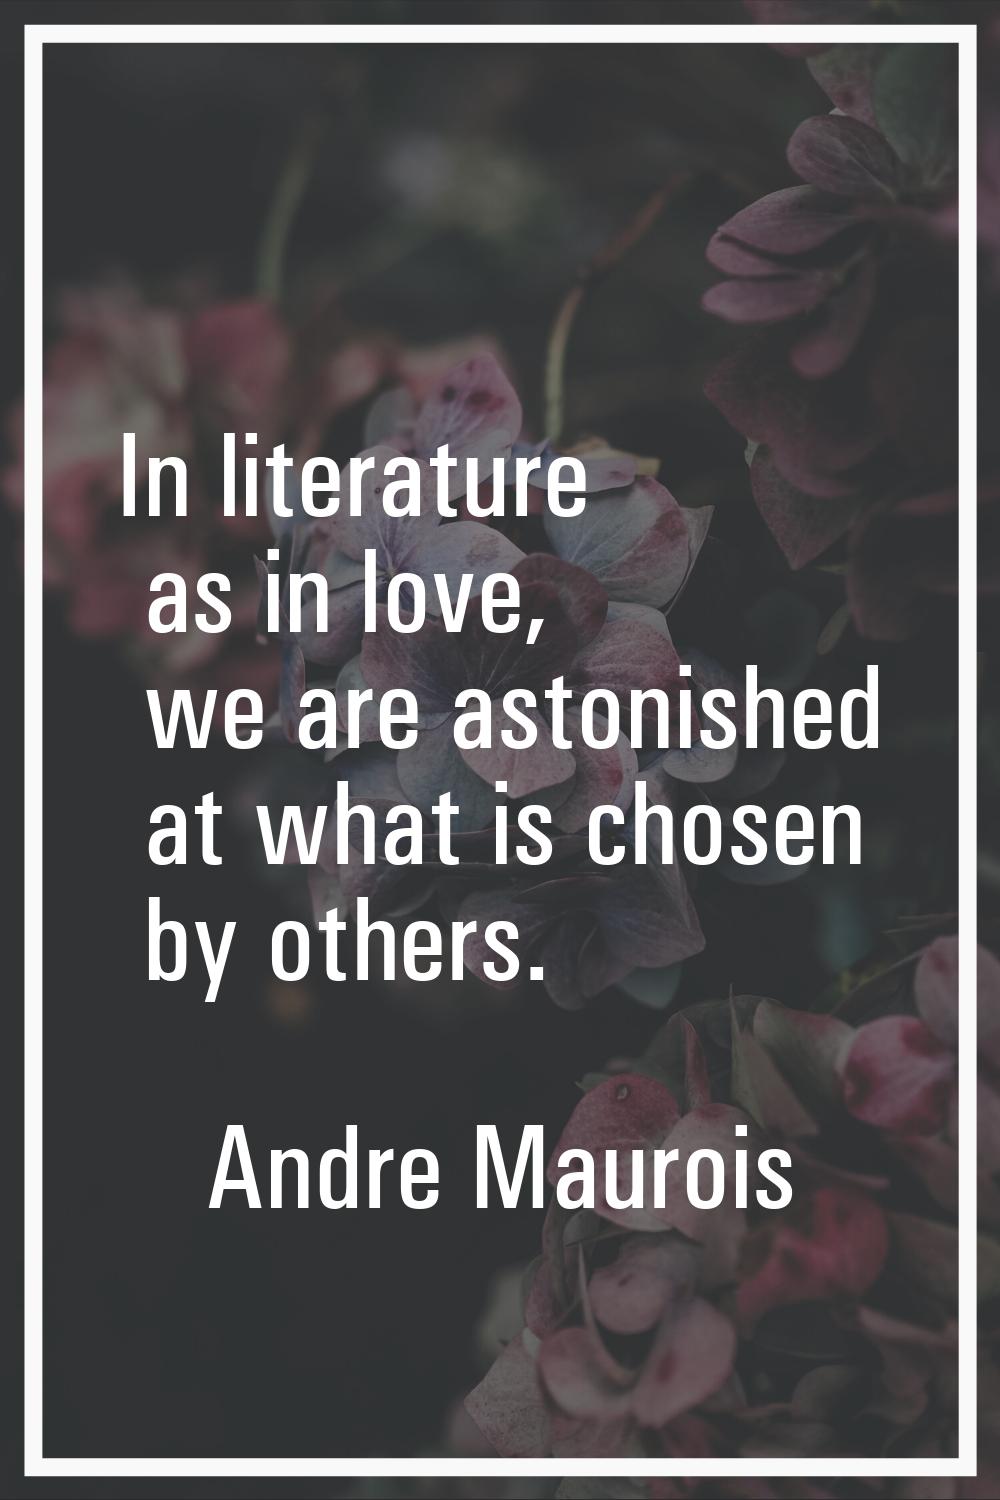 In literature as in love, we are astonished at what is chosen by others.